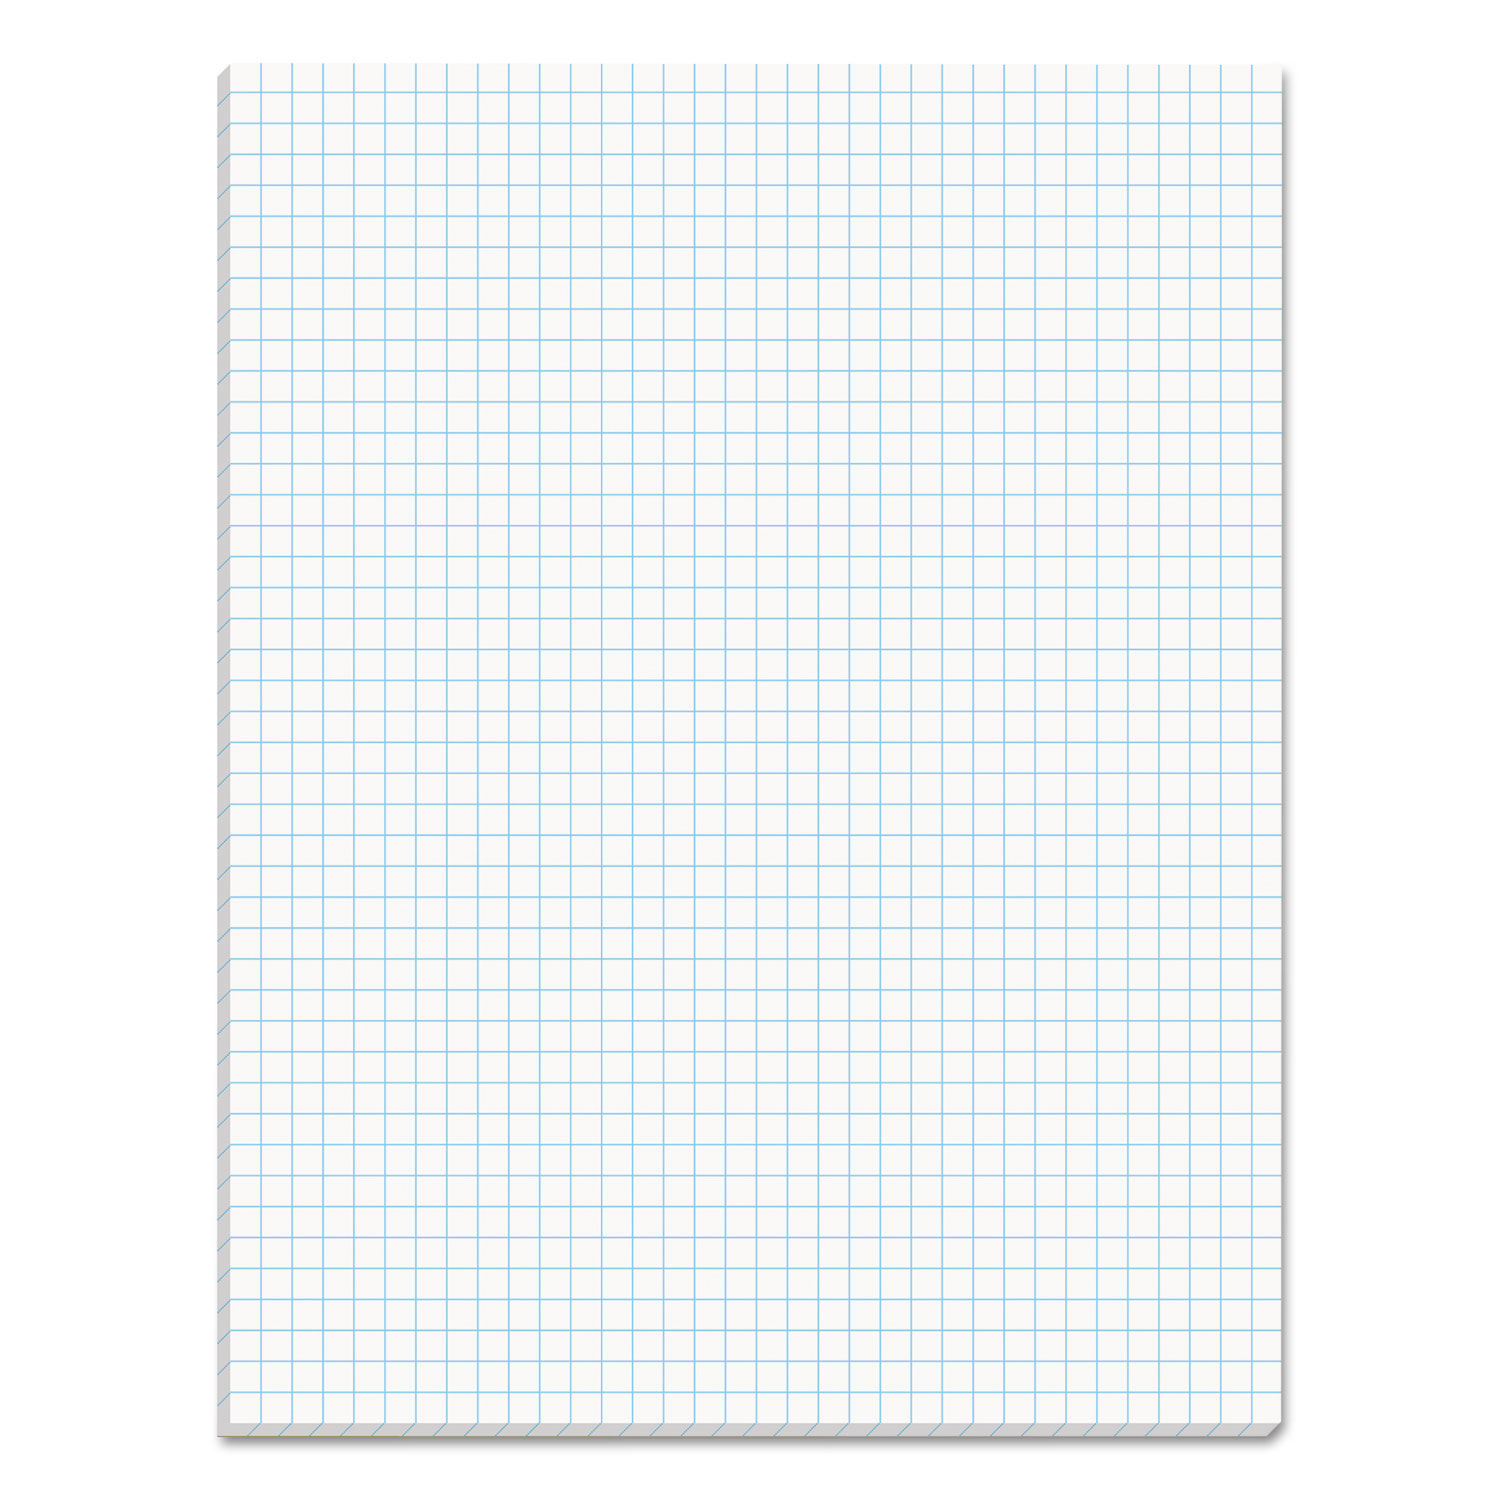 Quadrille Pads Quadrille Rule (4 sq/in), 50 White 8.5 x 11 Sheets